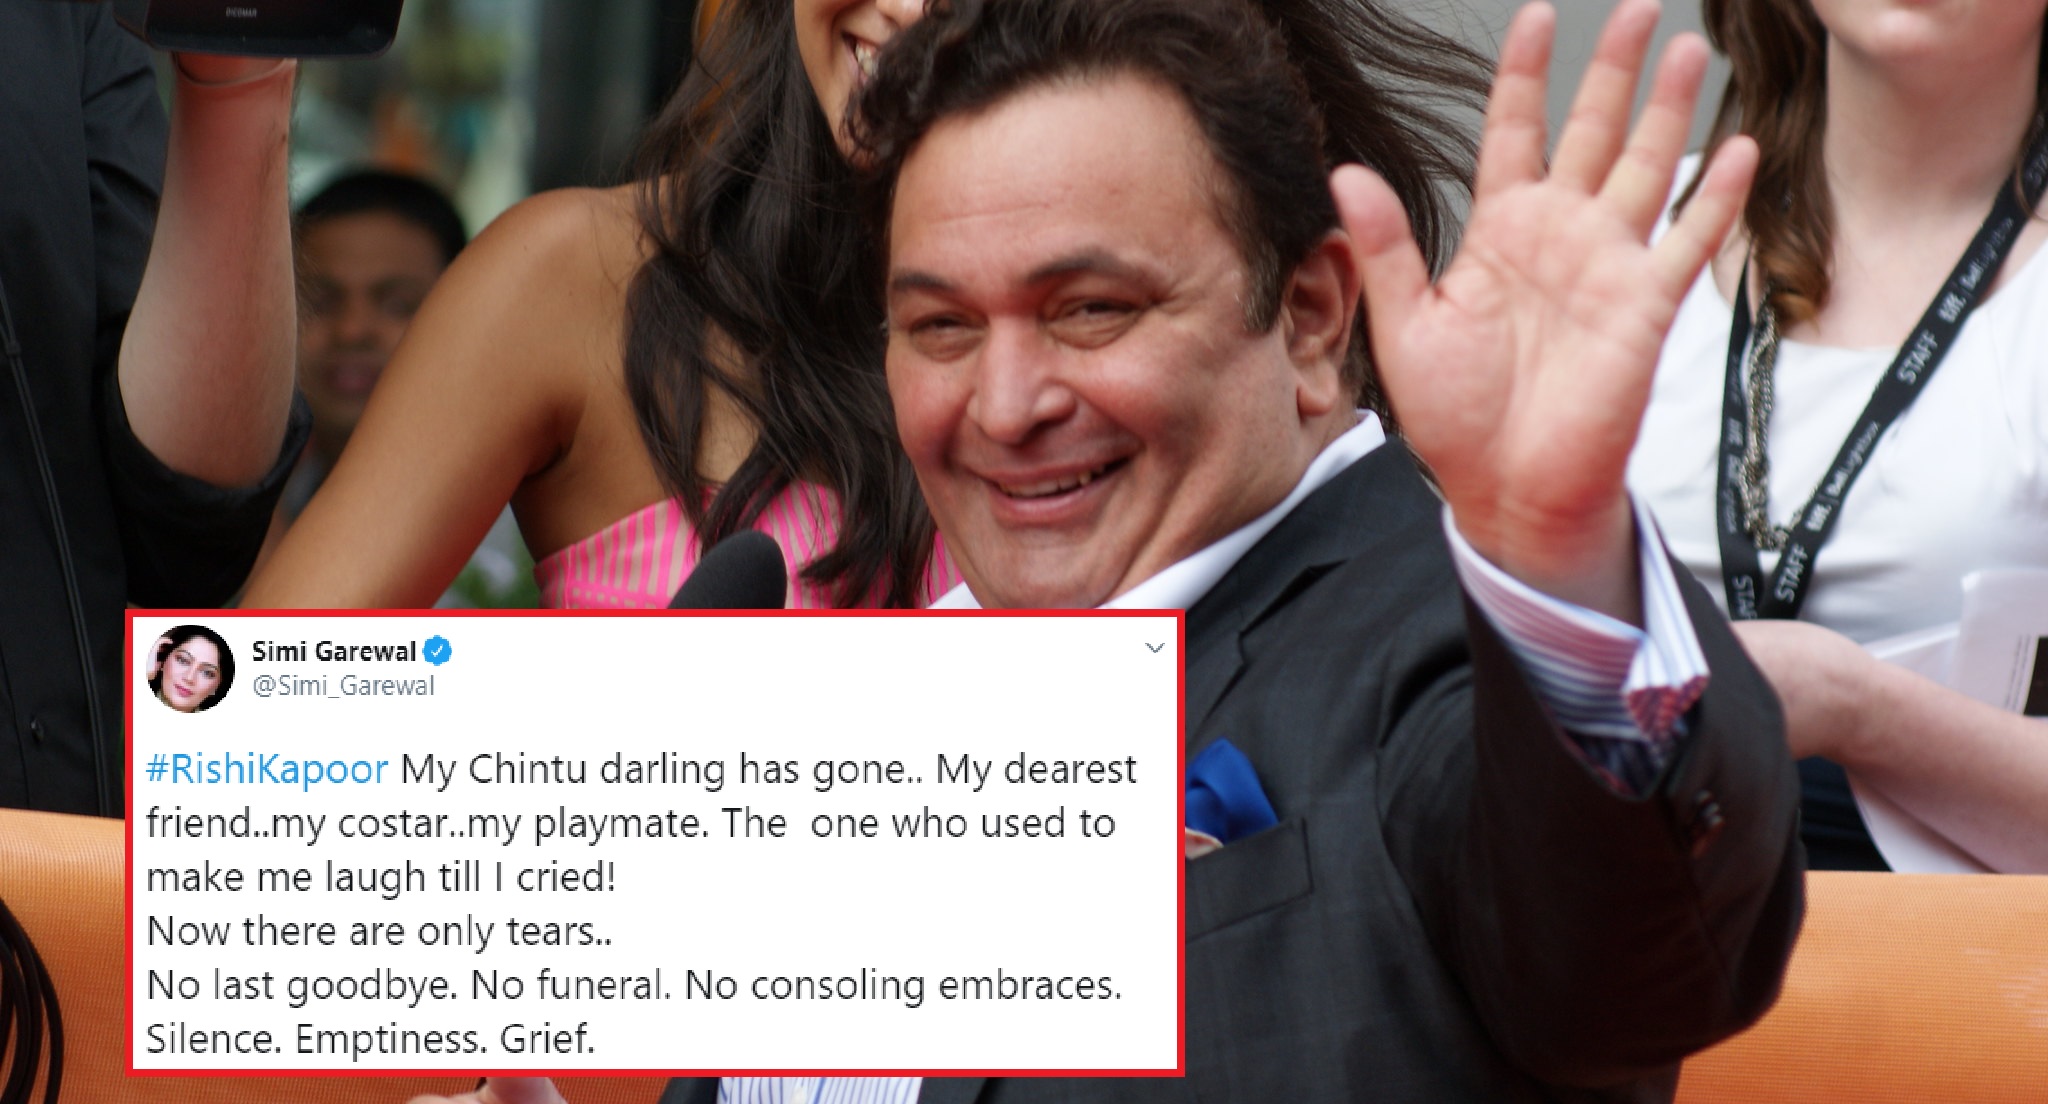 Remembering Chintoo: Here’s How Celebrities Have Poured Love On Rishi Kapoor After His Passing